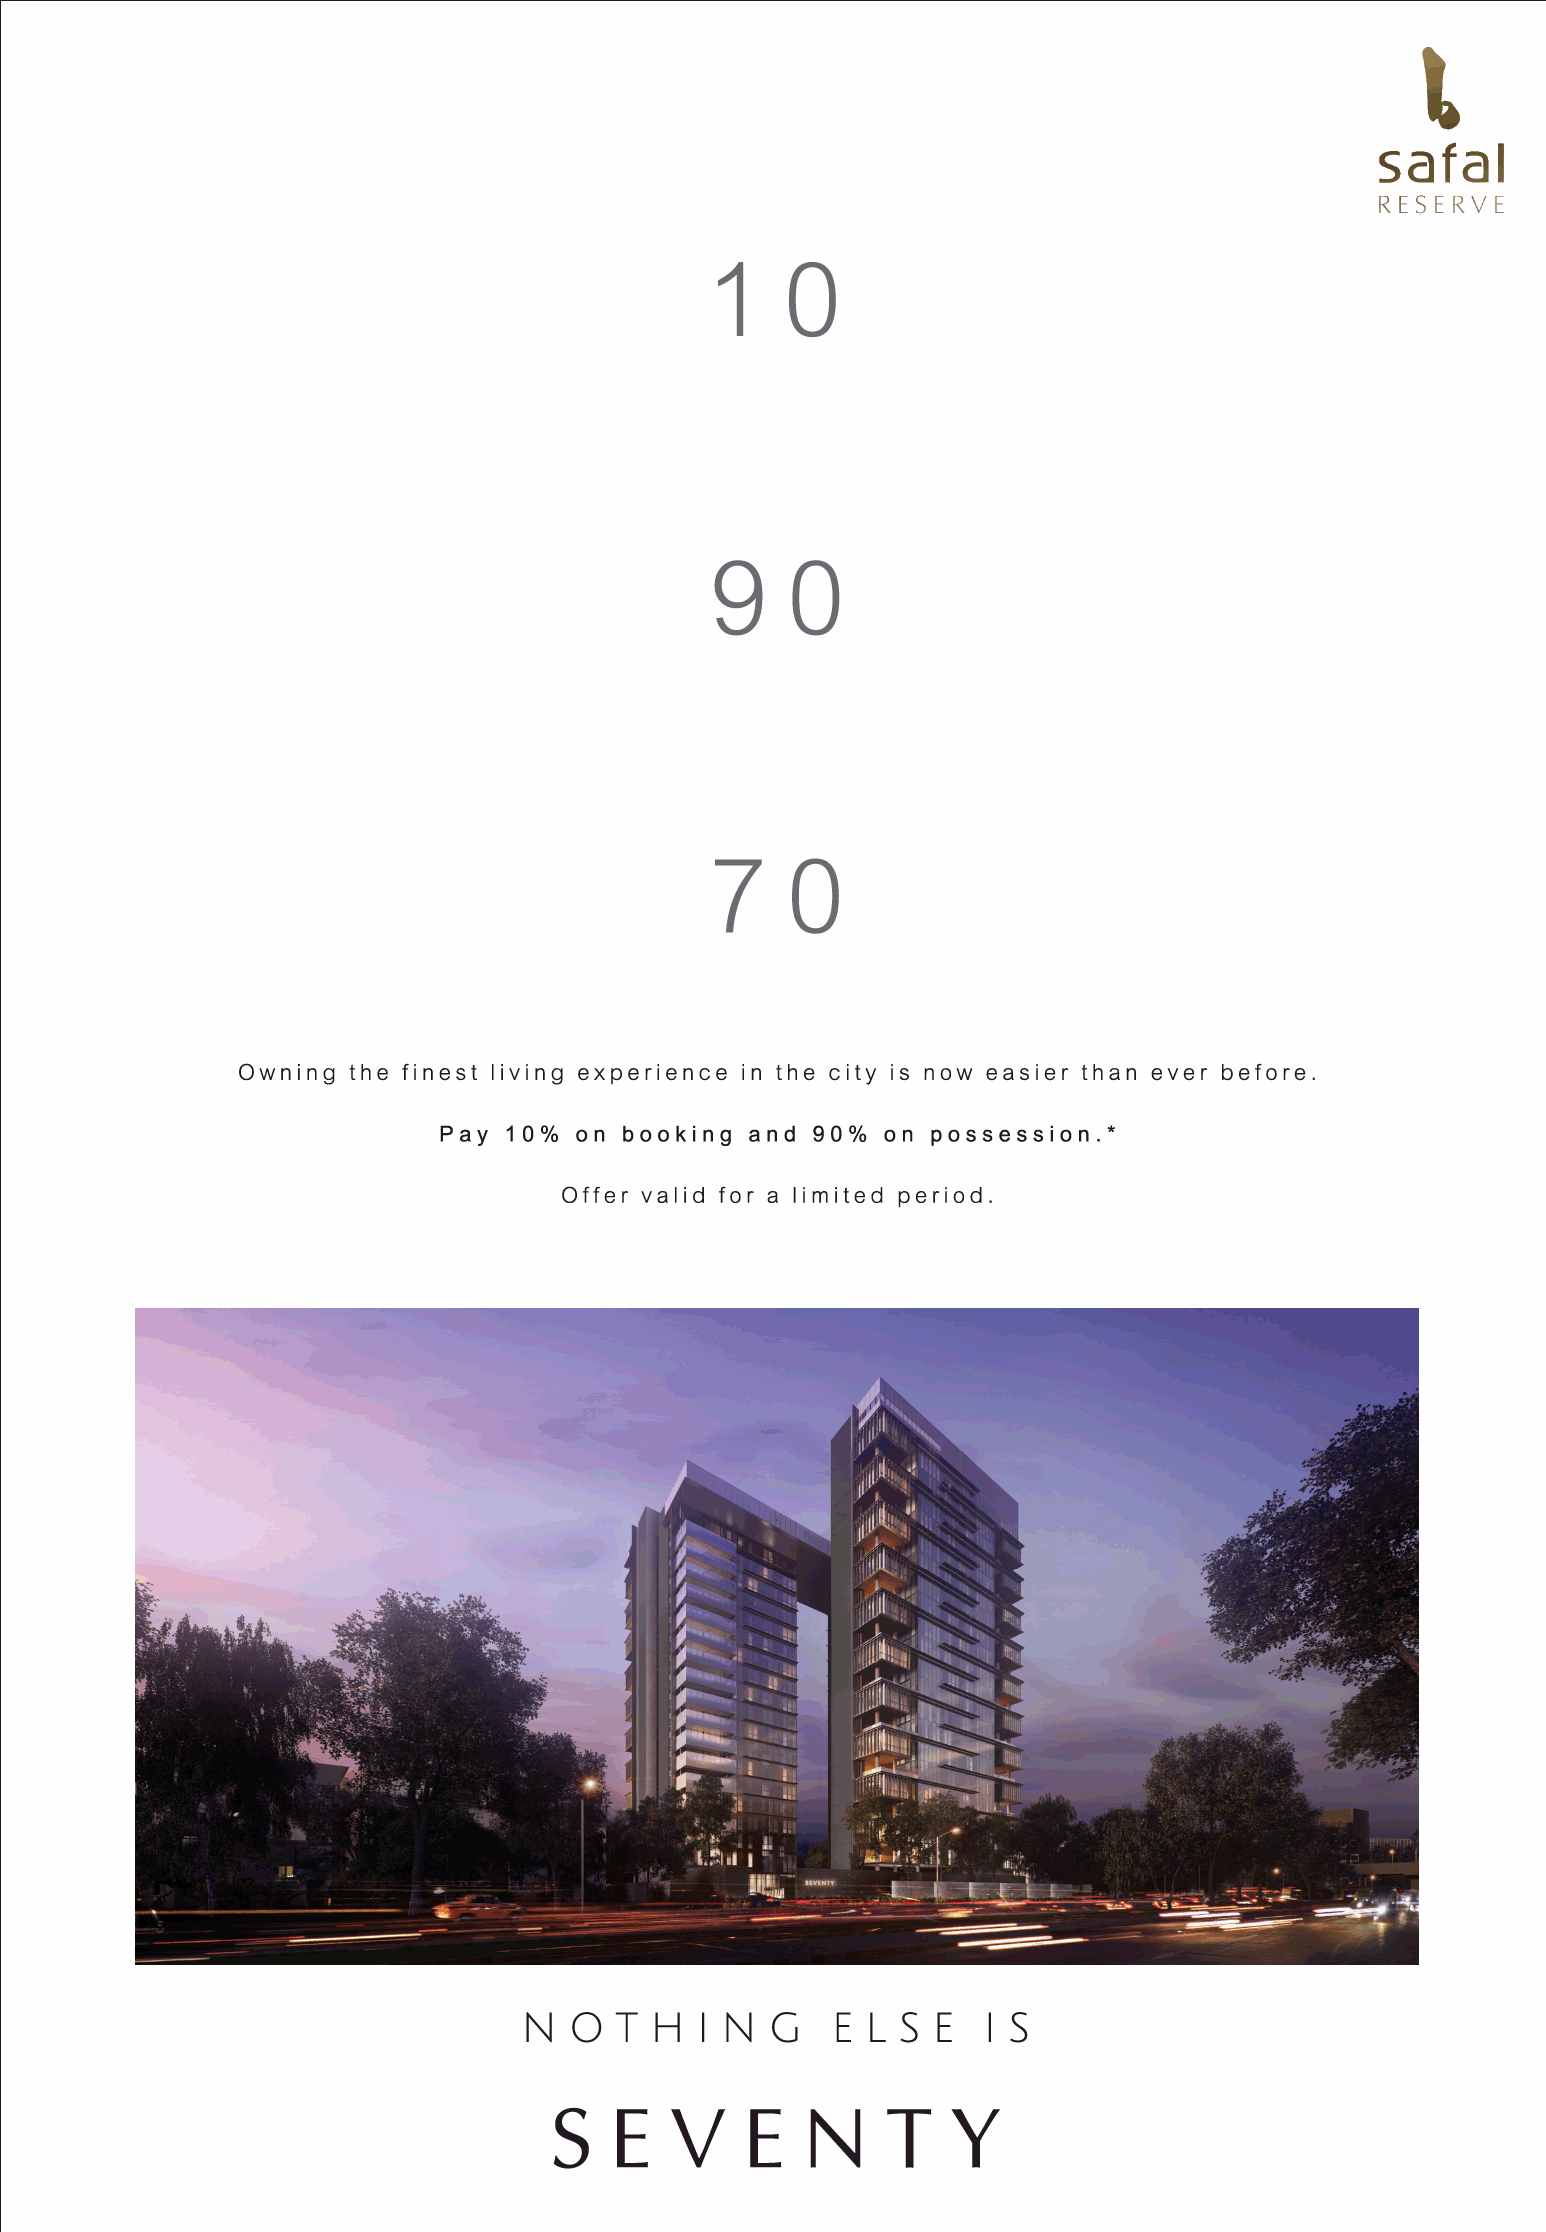 Own the finest living experience at B Safal Seventy in Ahmedabad